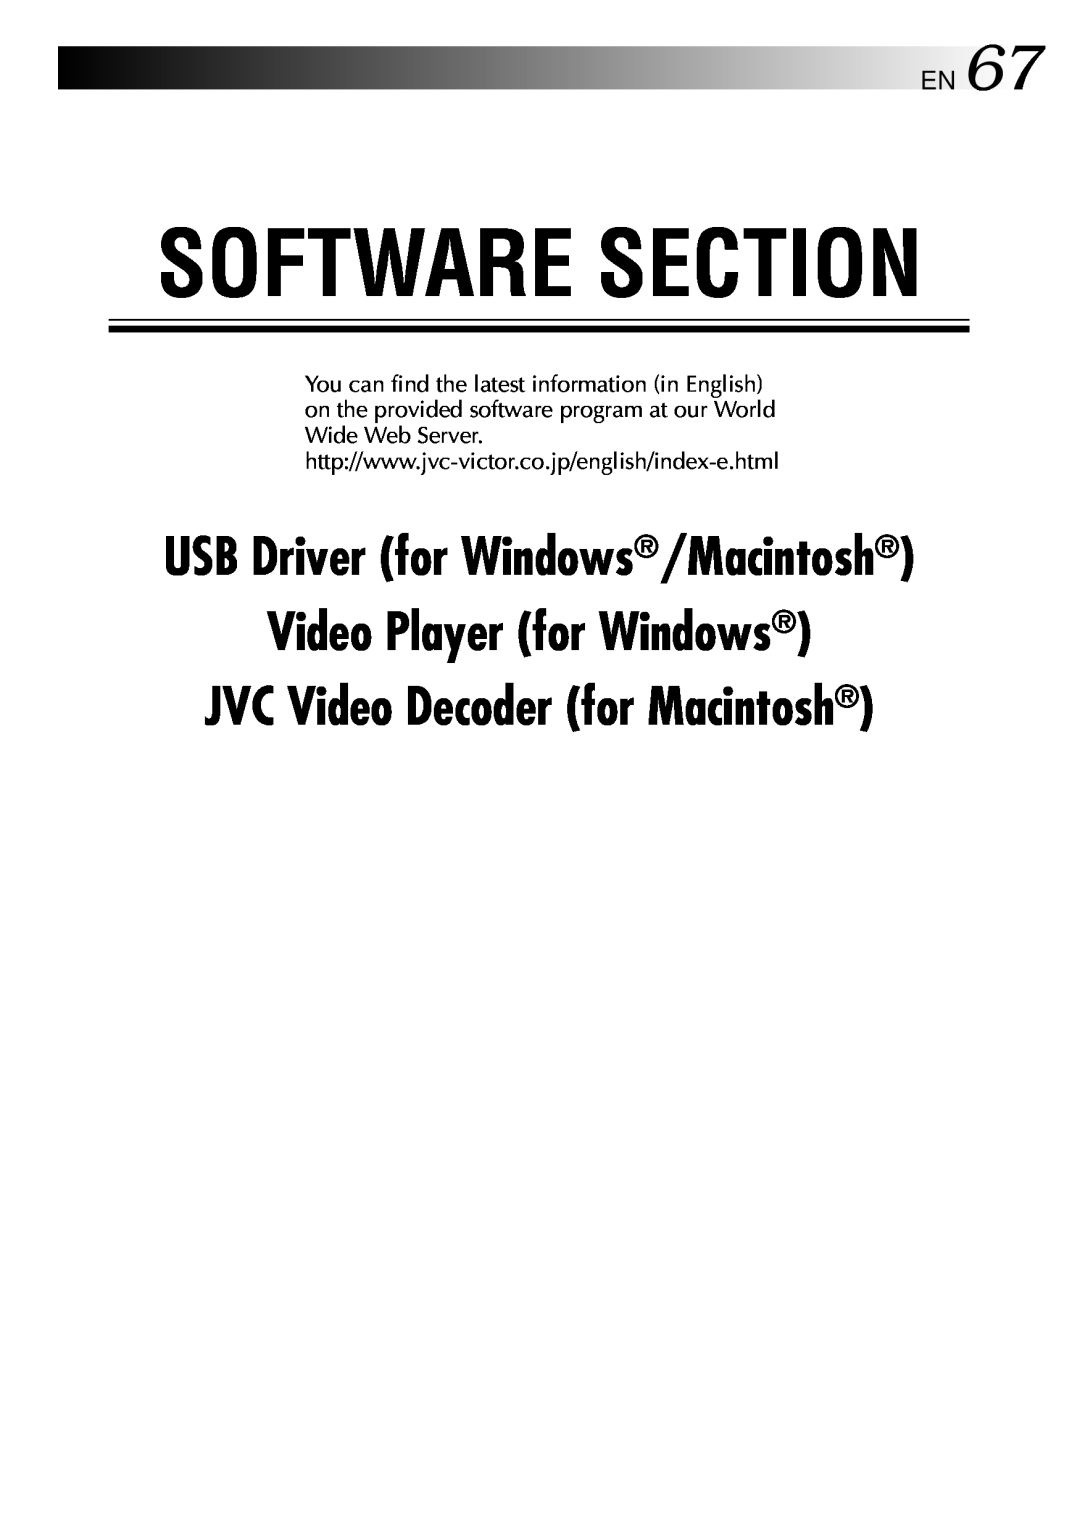 JVC GC-QX3 manual USB Driver for Windows/Macintosh, EN67, Software Section, Video Player for Windows 